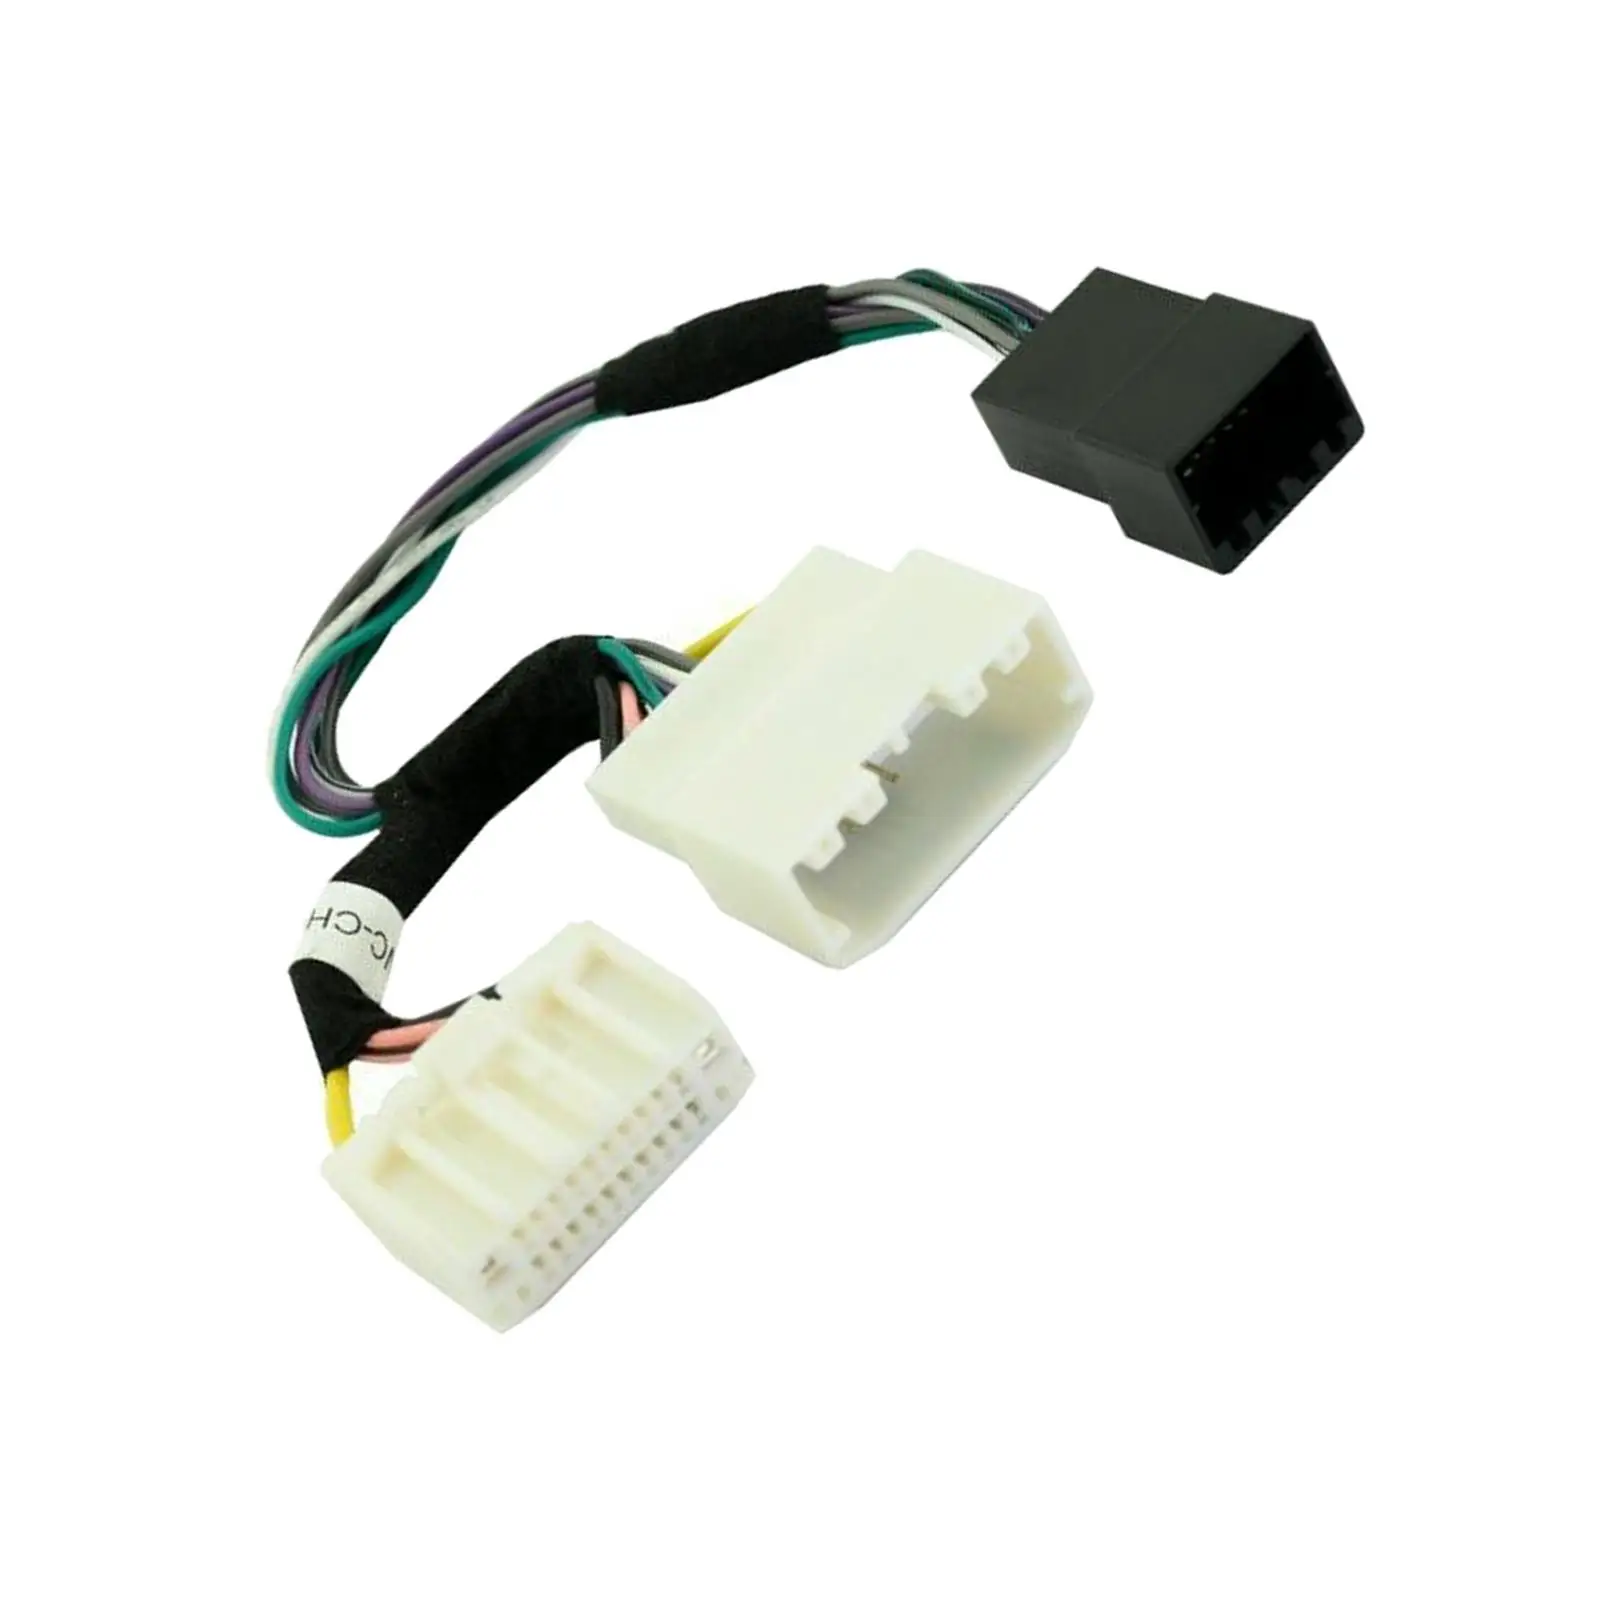 Anc-Ch01 Replaces ANC Module Bypass Harness for Chrysler, Jeep, RAM